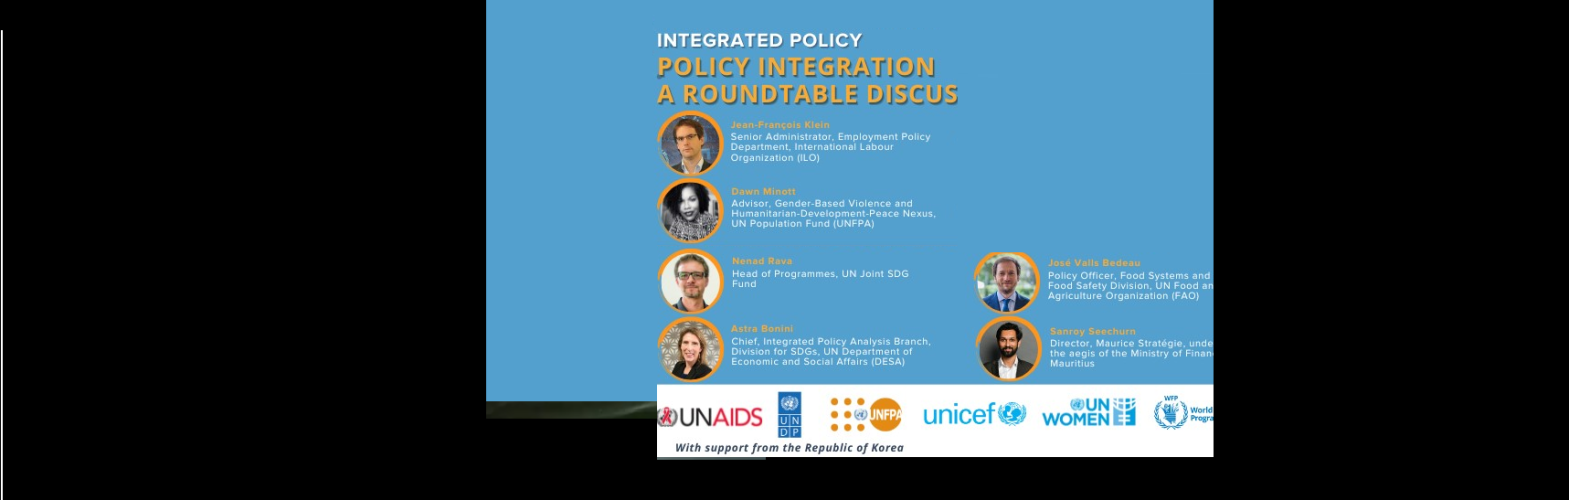 Integrated Policy roundtable